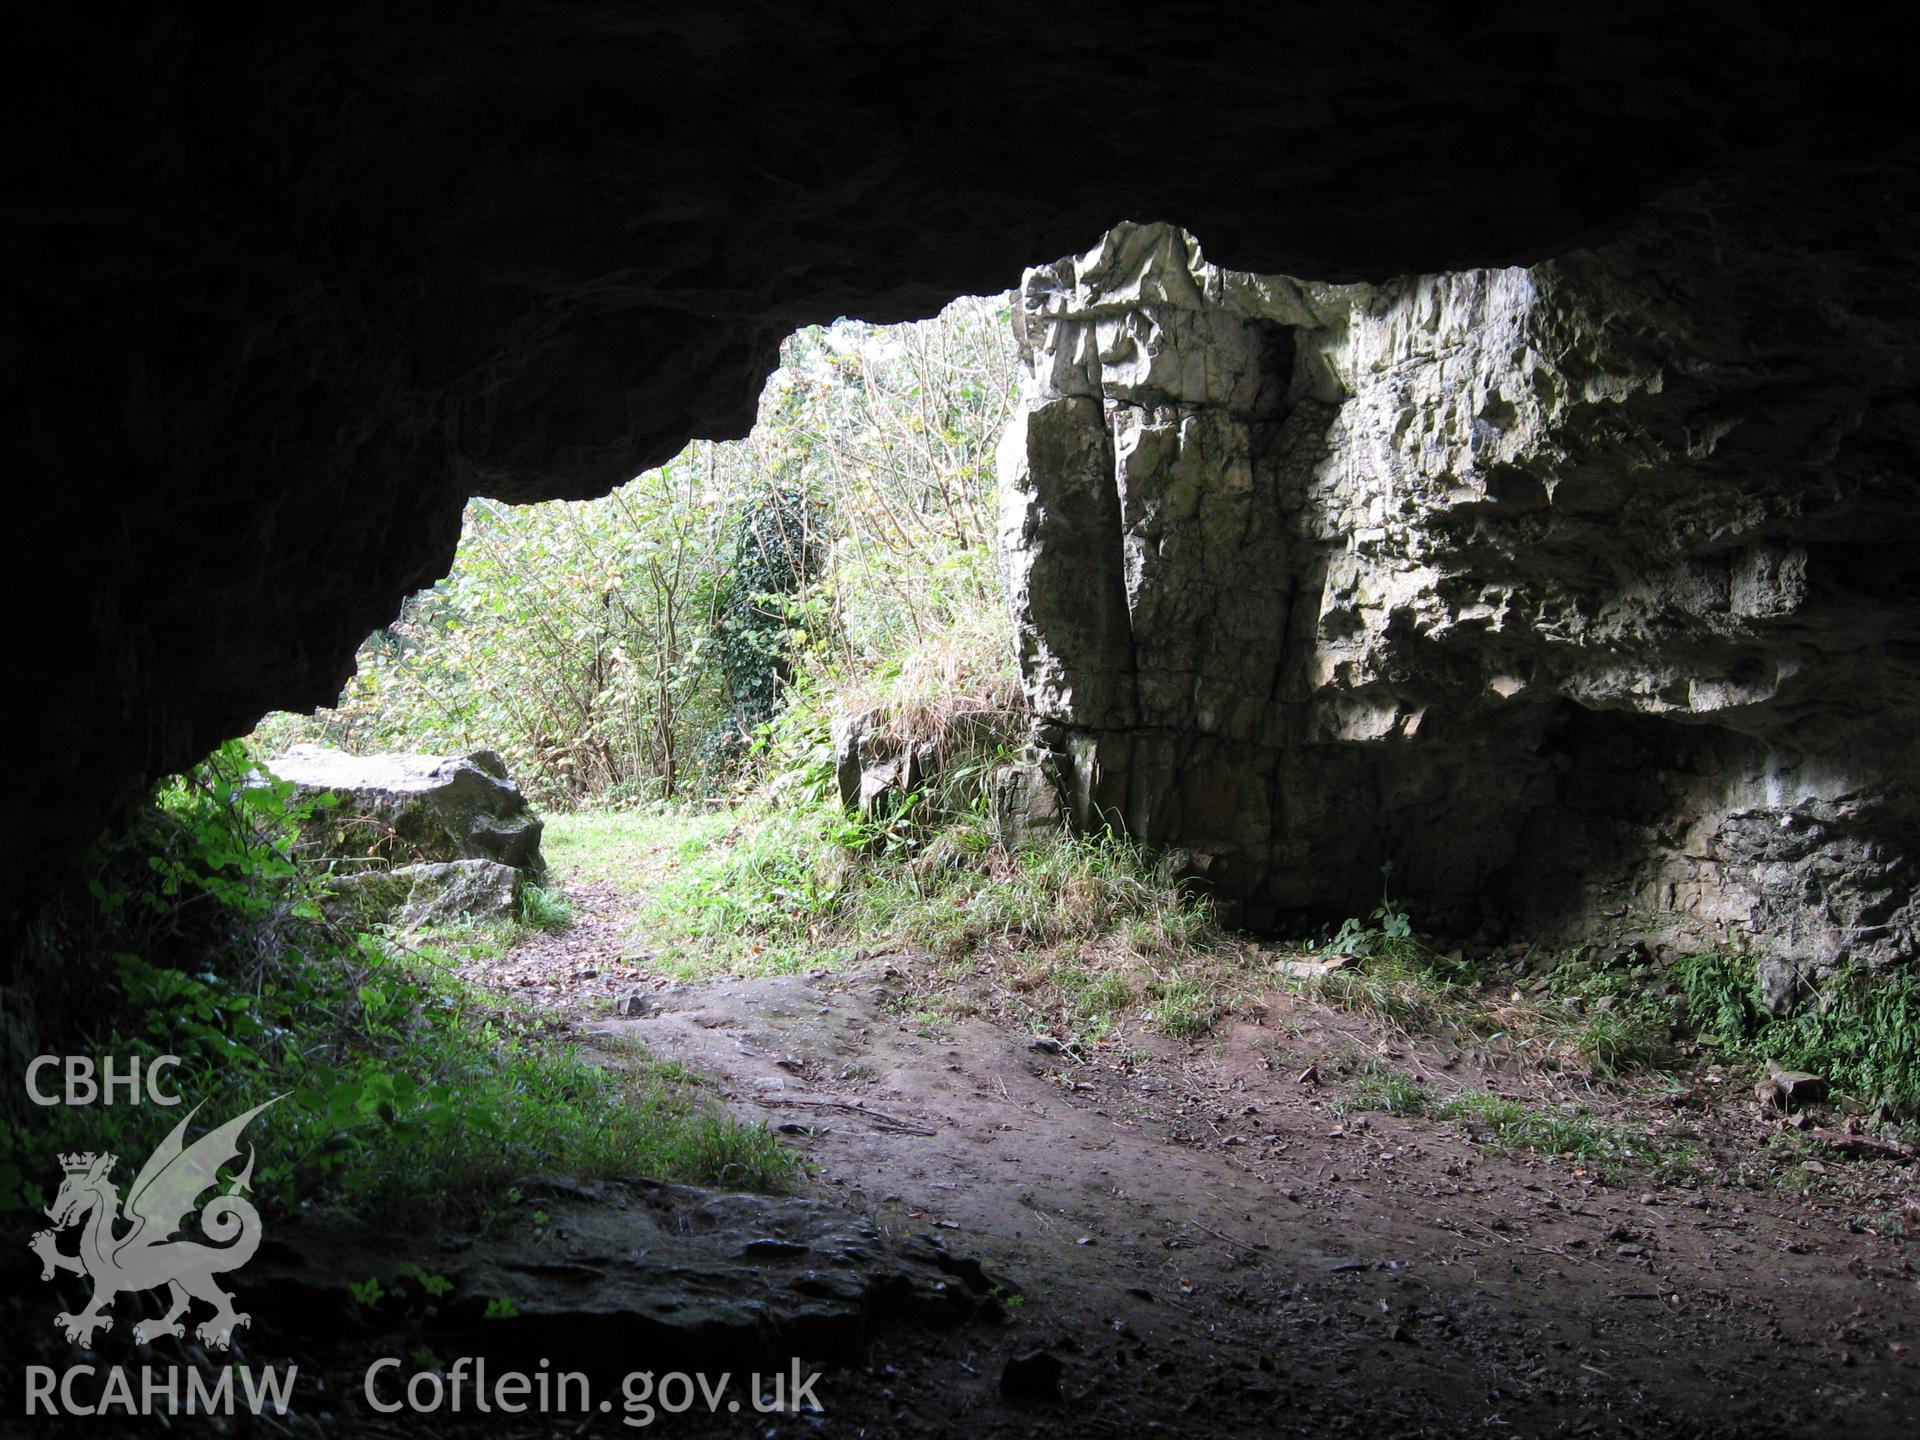 Colour photo of Cathole Cave, taken by Paul R. Davis and dated 22nd October 2007.